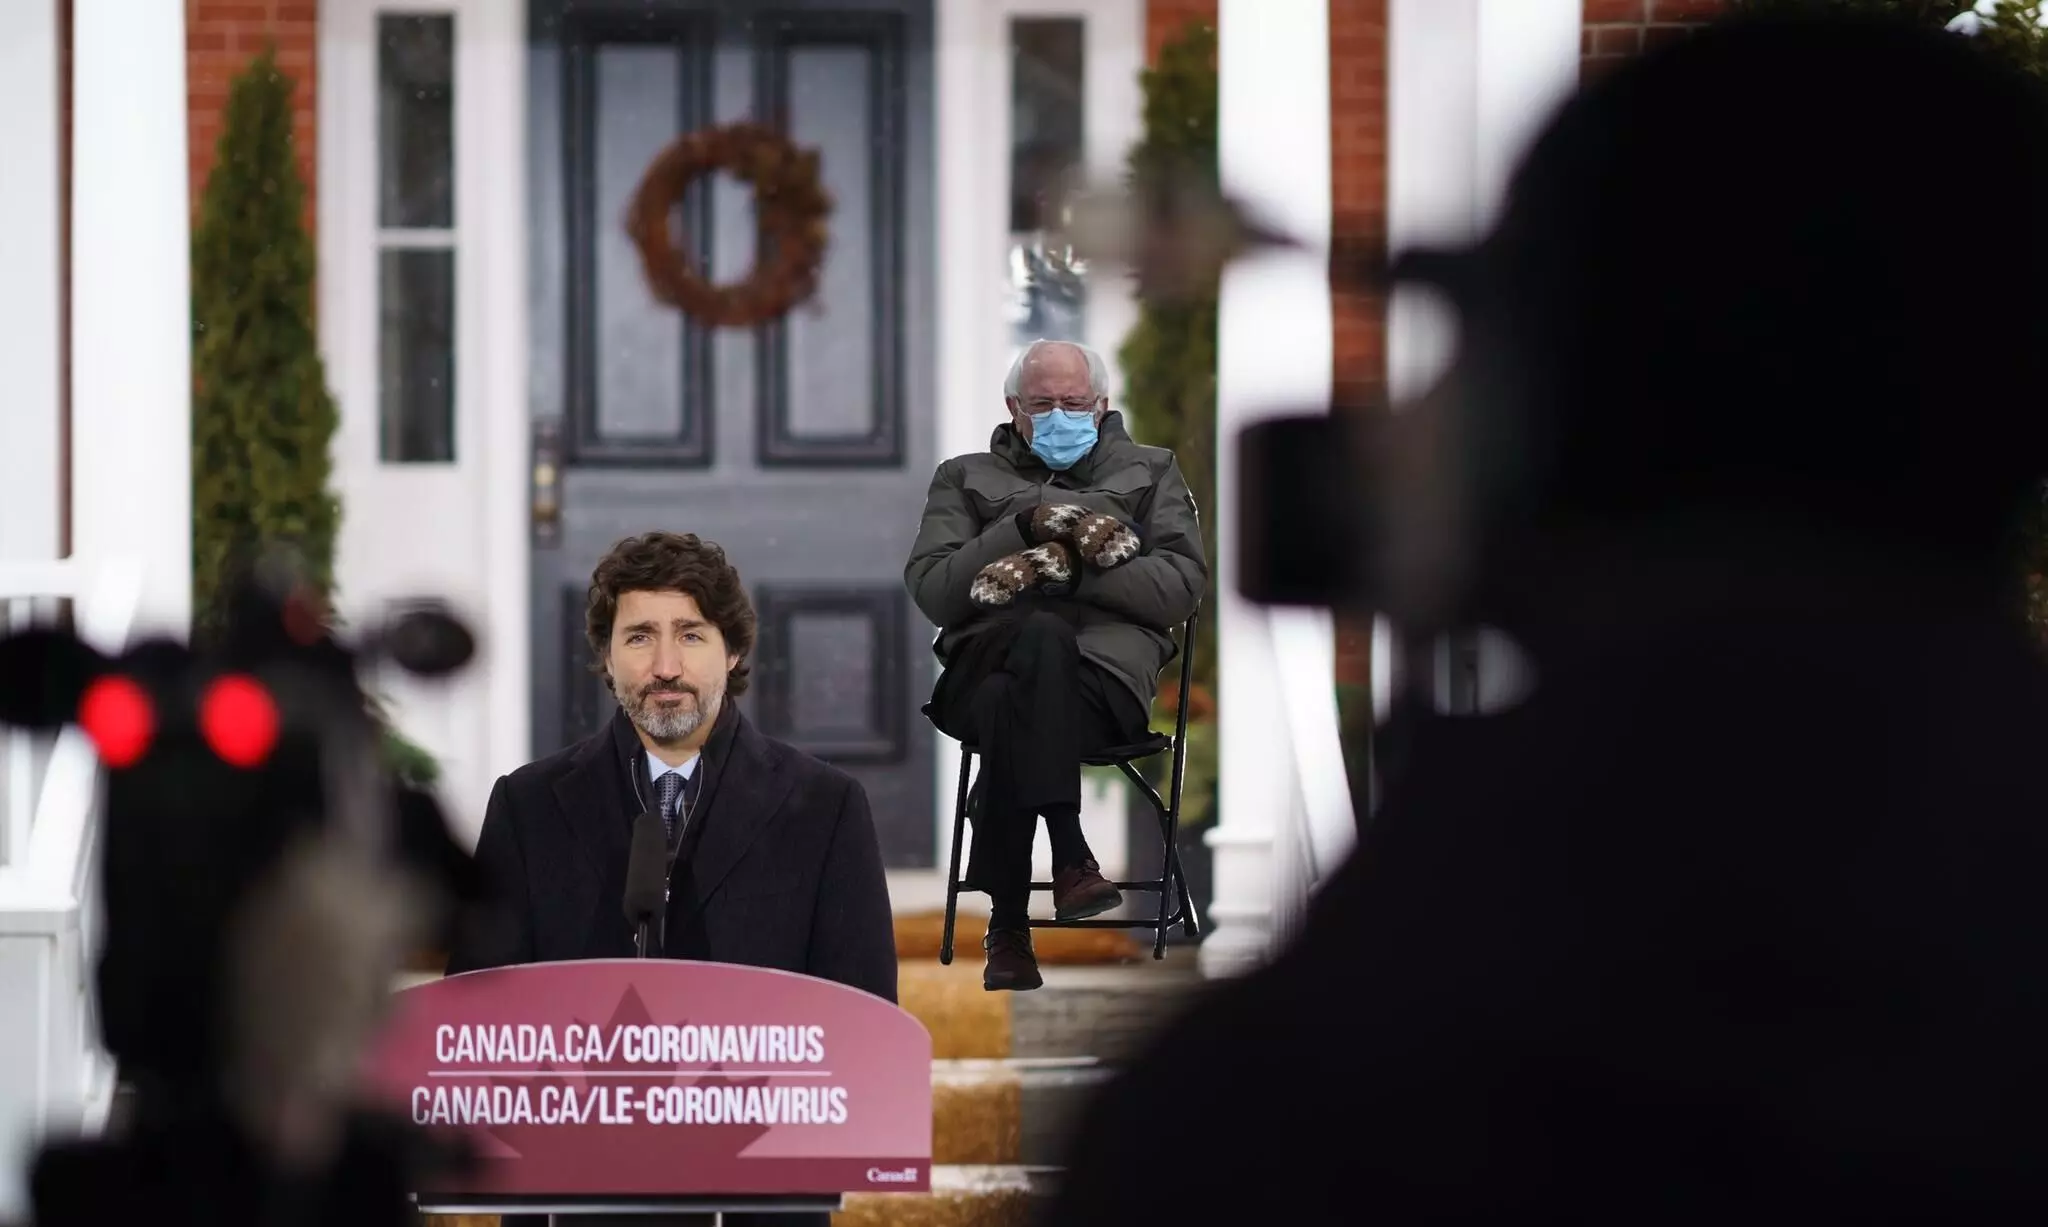 Justin Trudeau uses Bernie Sanders meme to encourage Canadians to stay home